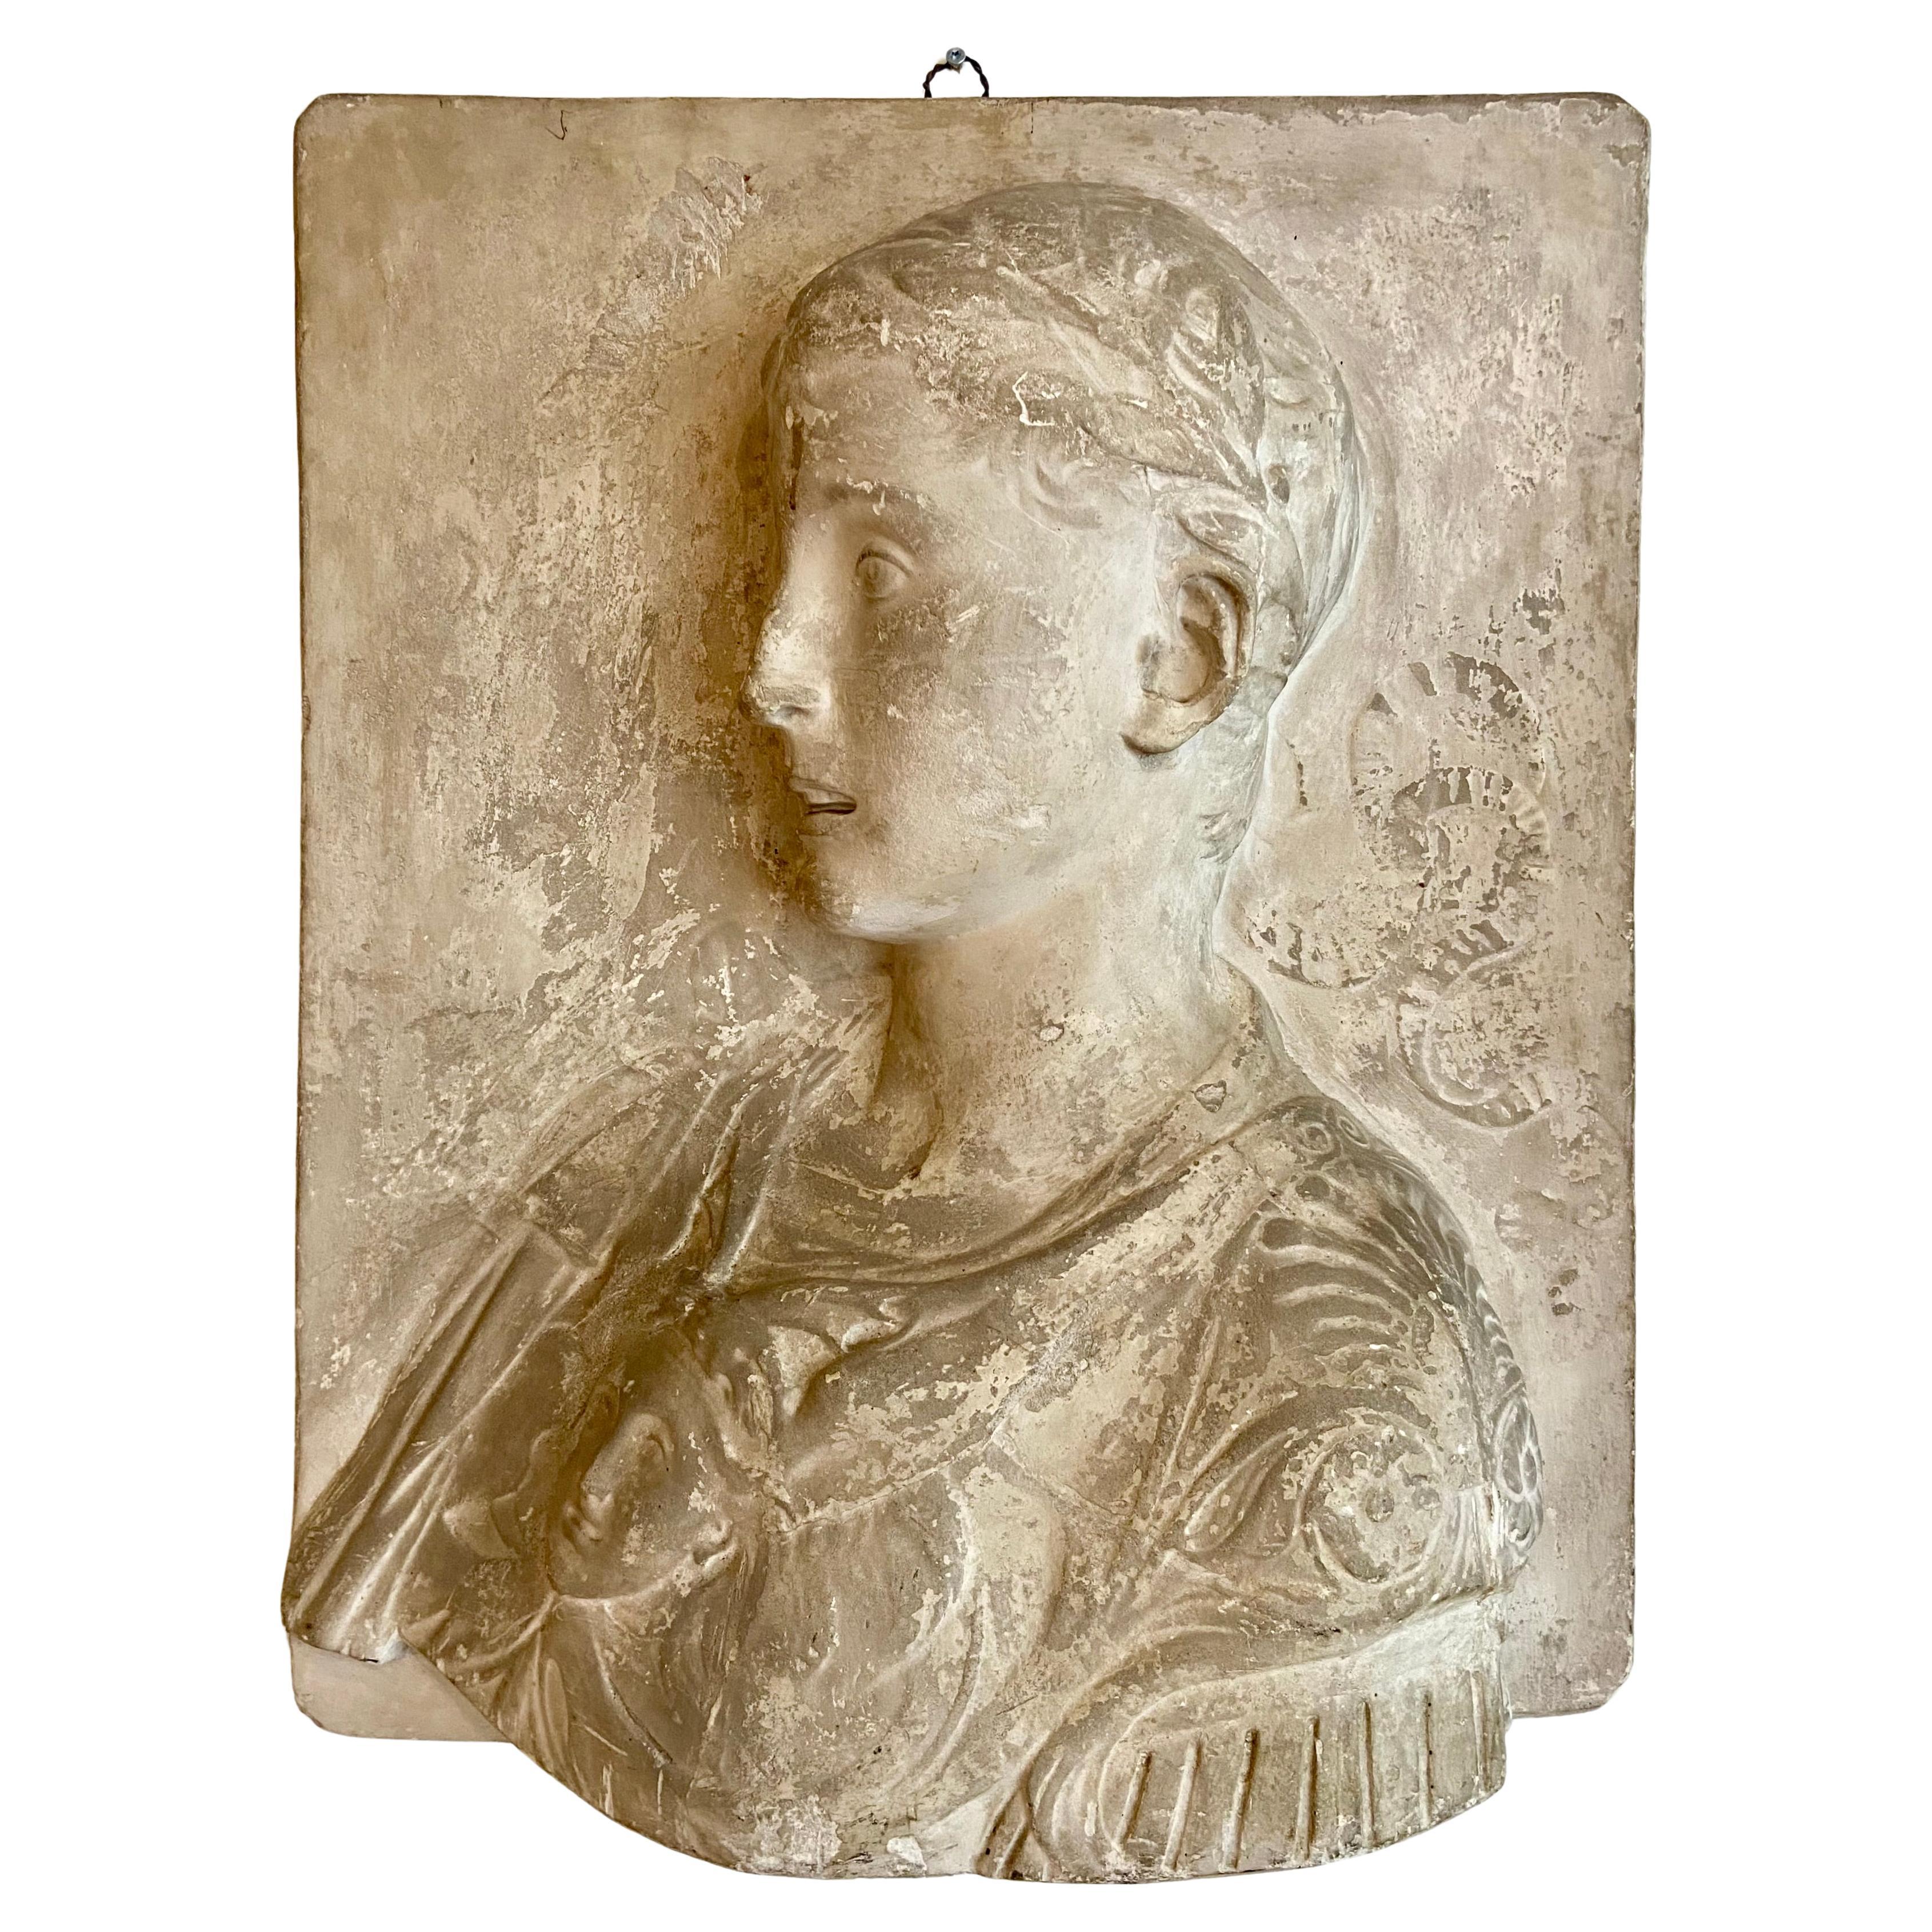 Stucco bust of a young roman emperor in relief.